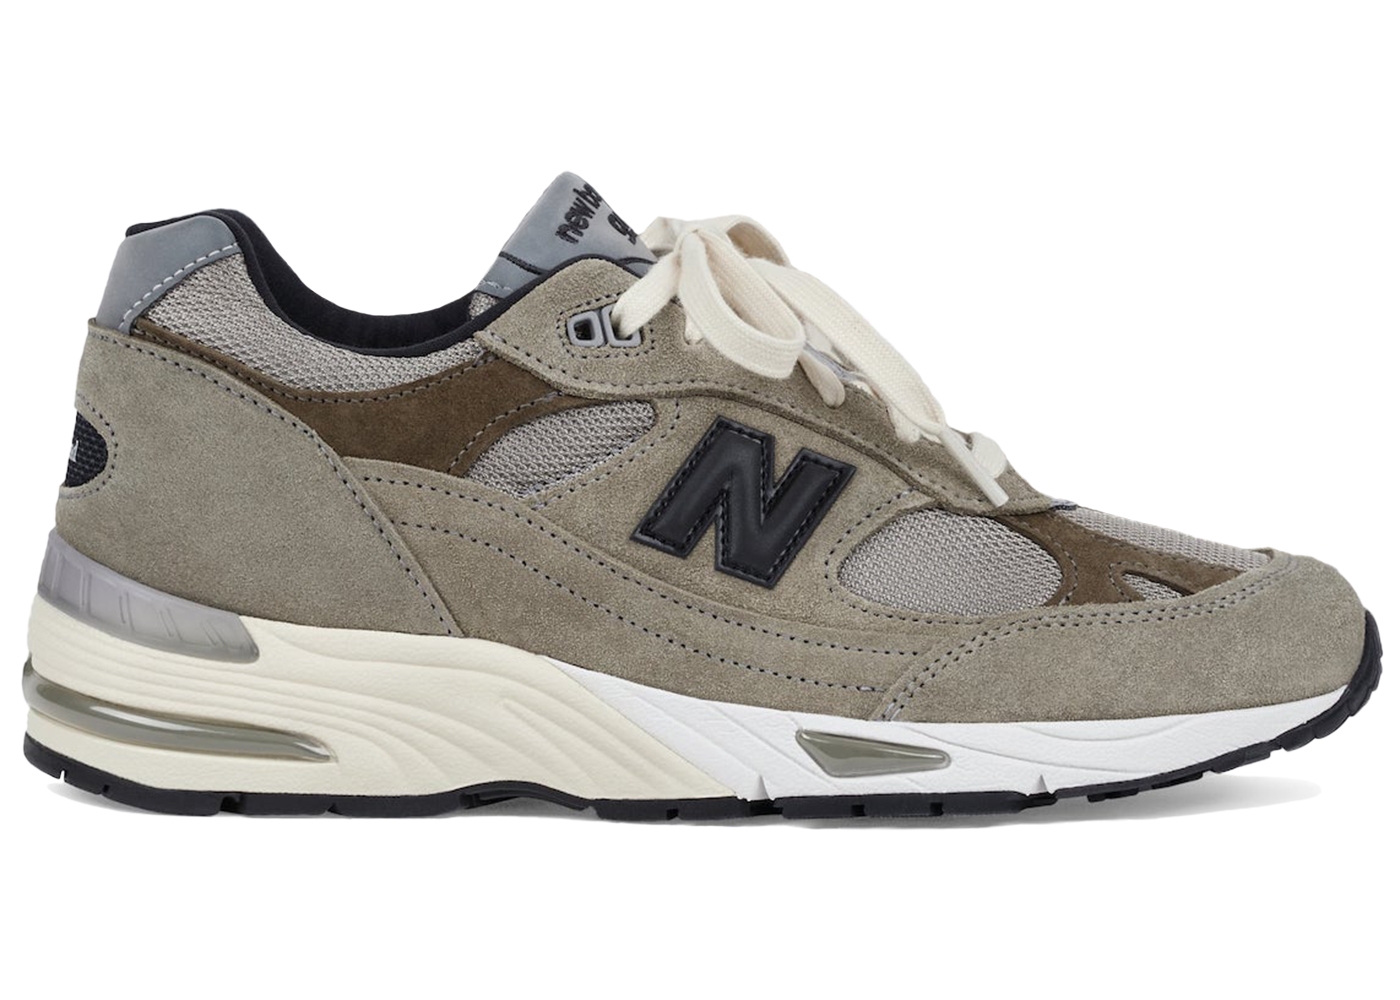 Buy New Balance 991 Shoes & New Sneakers - StockX